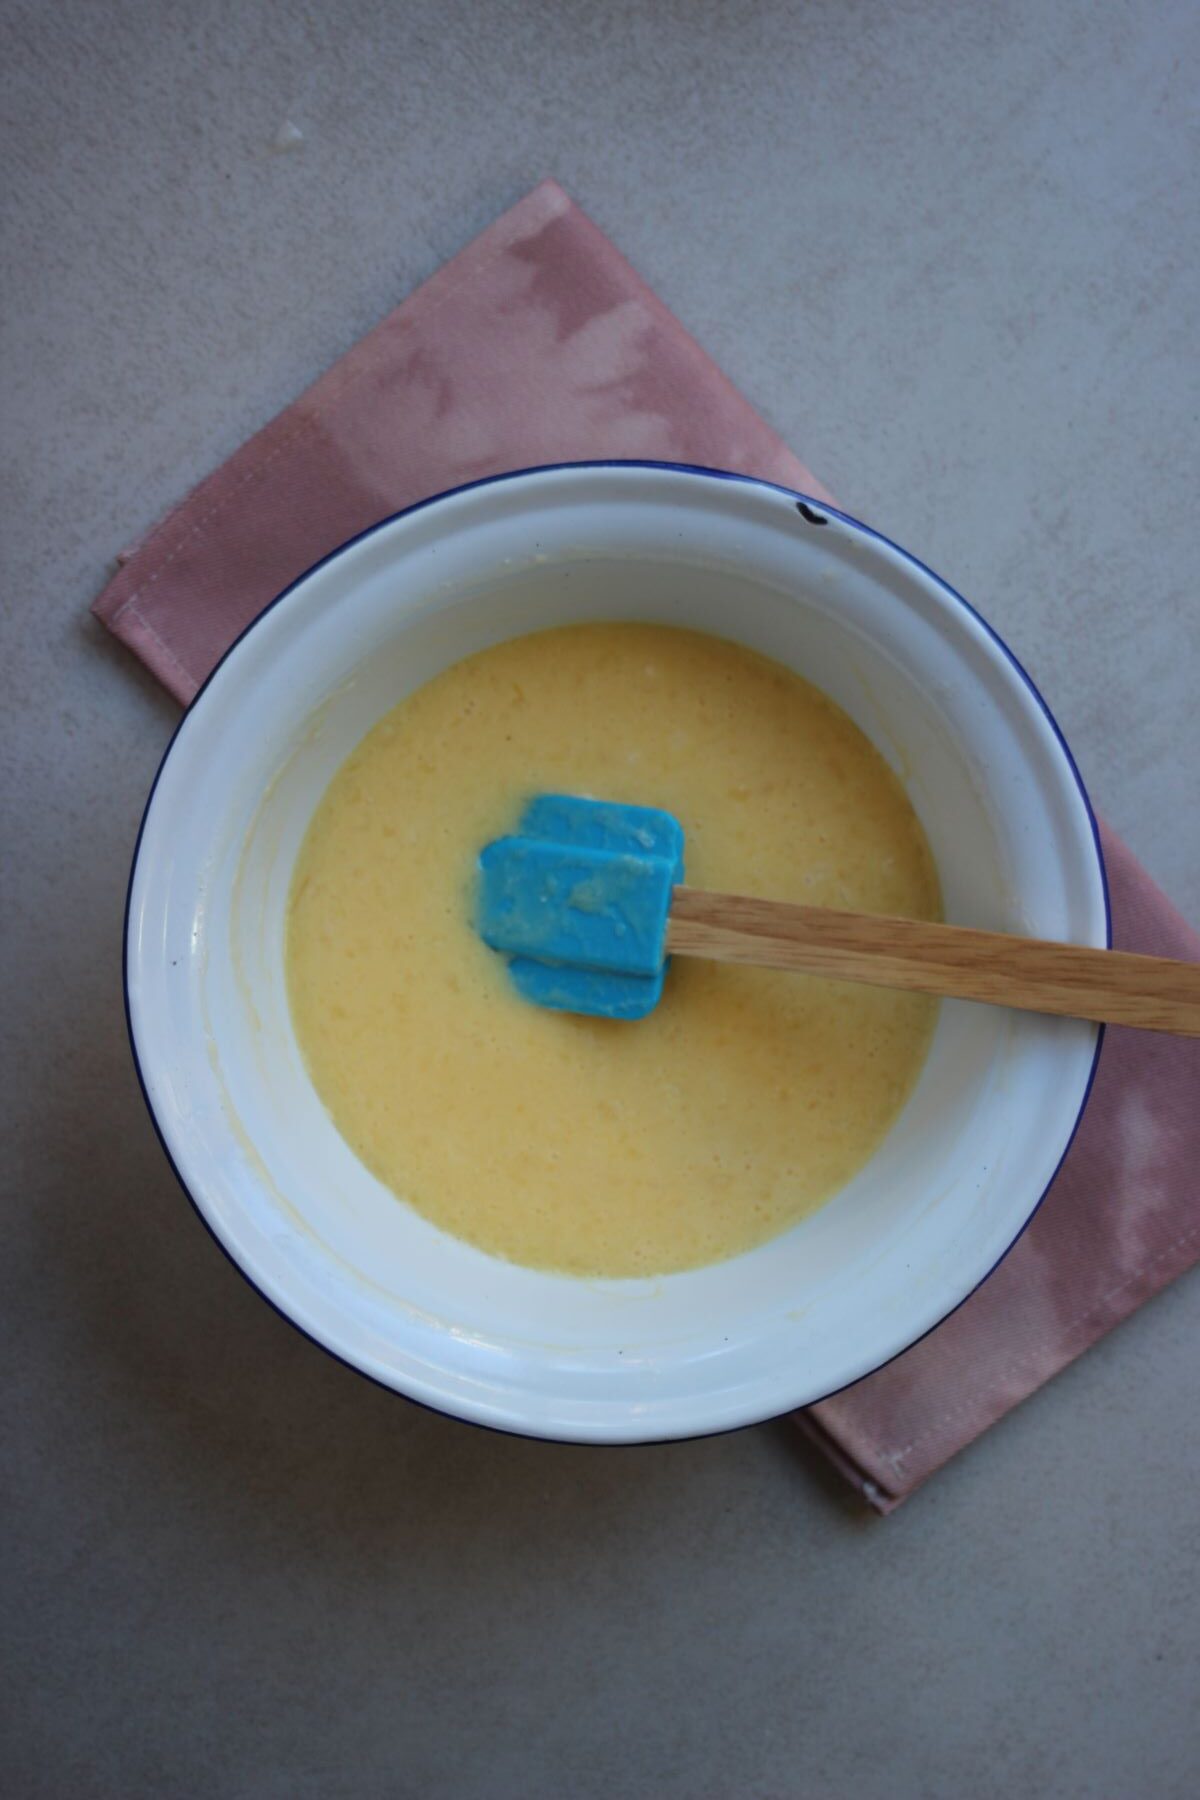 Bowl with a yellow liquid and a rubber spatula.